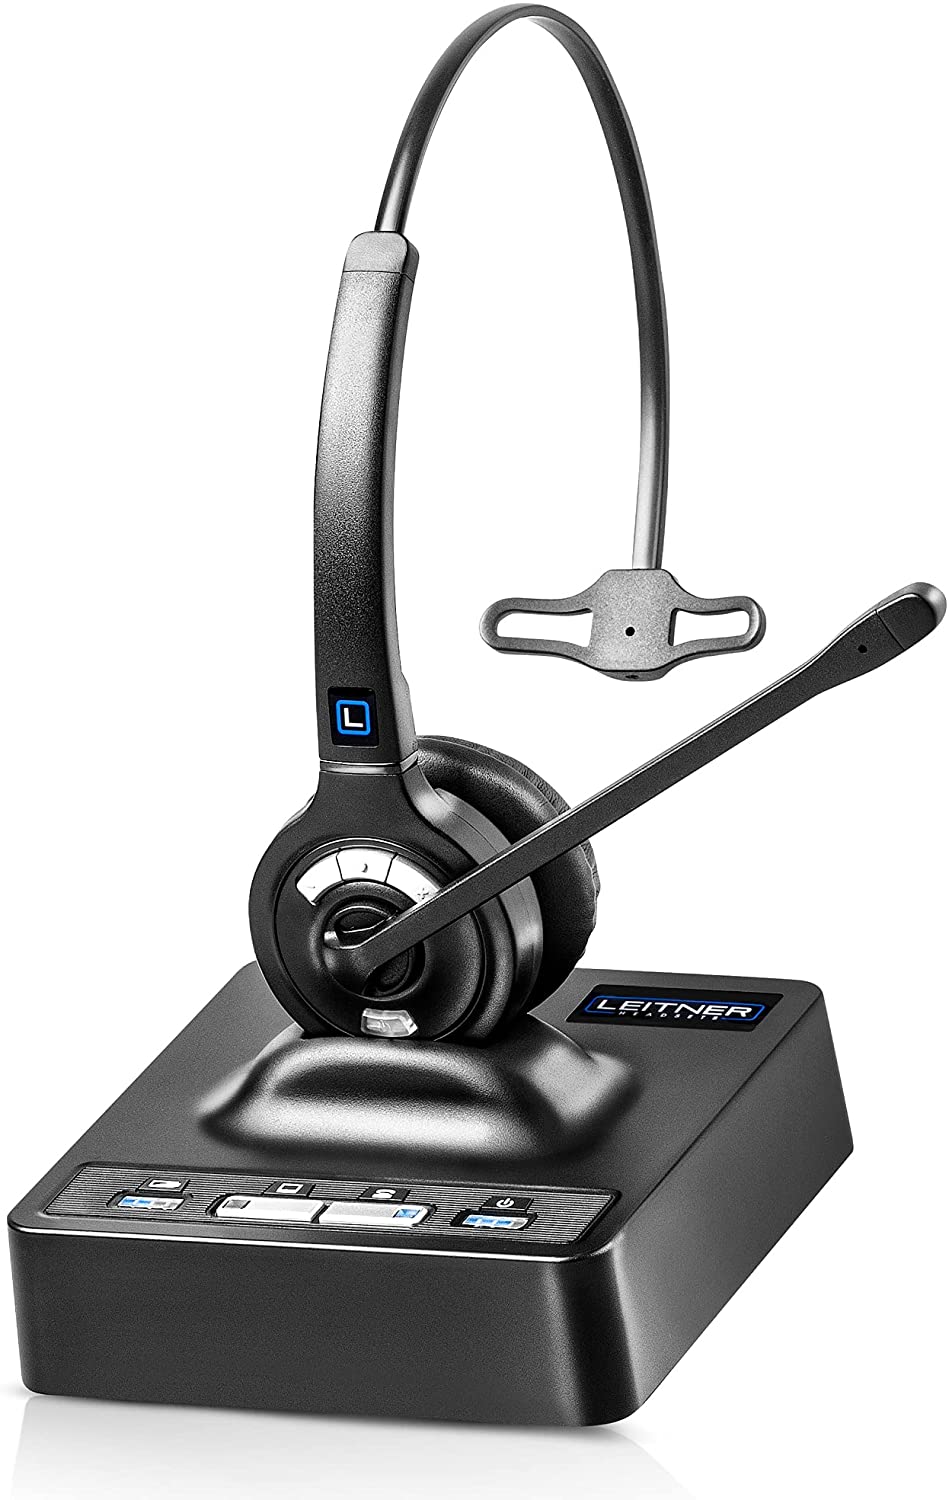 Leitner LH270 – Wireless Office Headset with Microphone for Telephone and Computer – Works with Avaya, Yealink, Polycom, Cisco, VoIP and 99% of Desk Phones and PC’s (USB and Phone Jack)